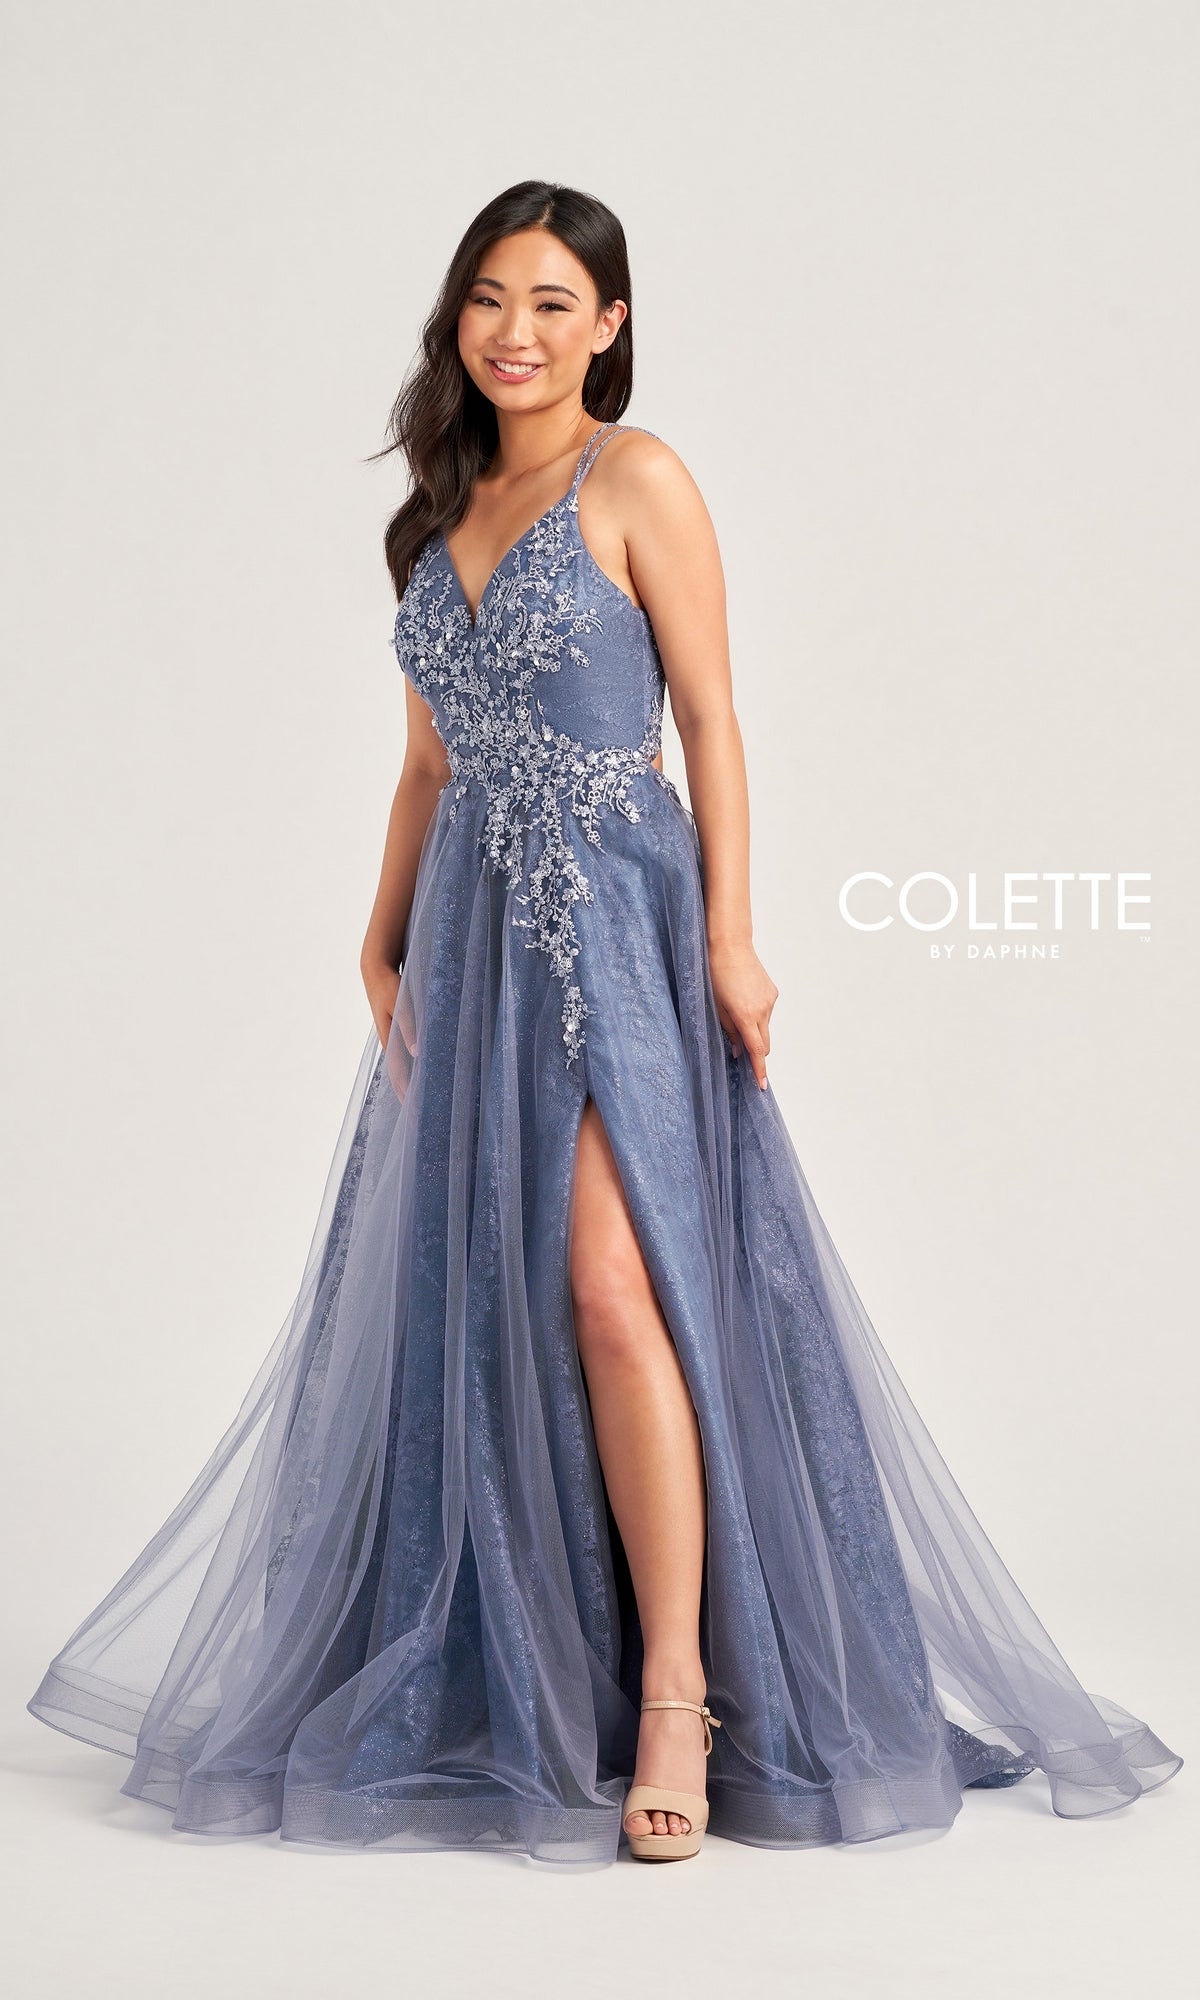 Glitter-Lace Colette Long Prom Ball Gown CL5197